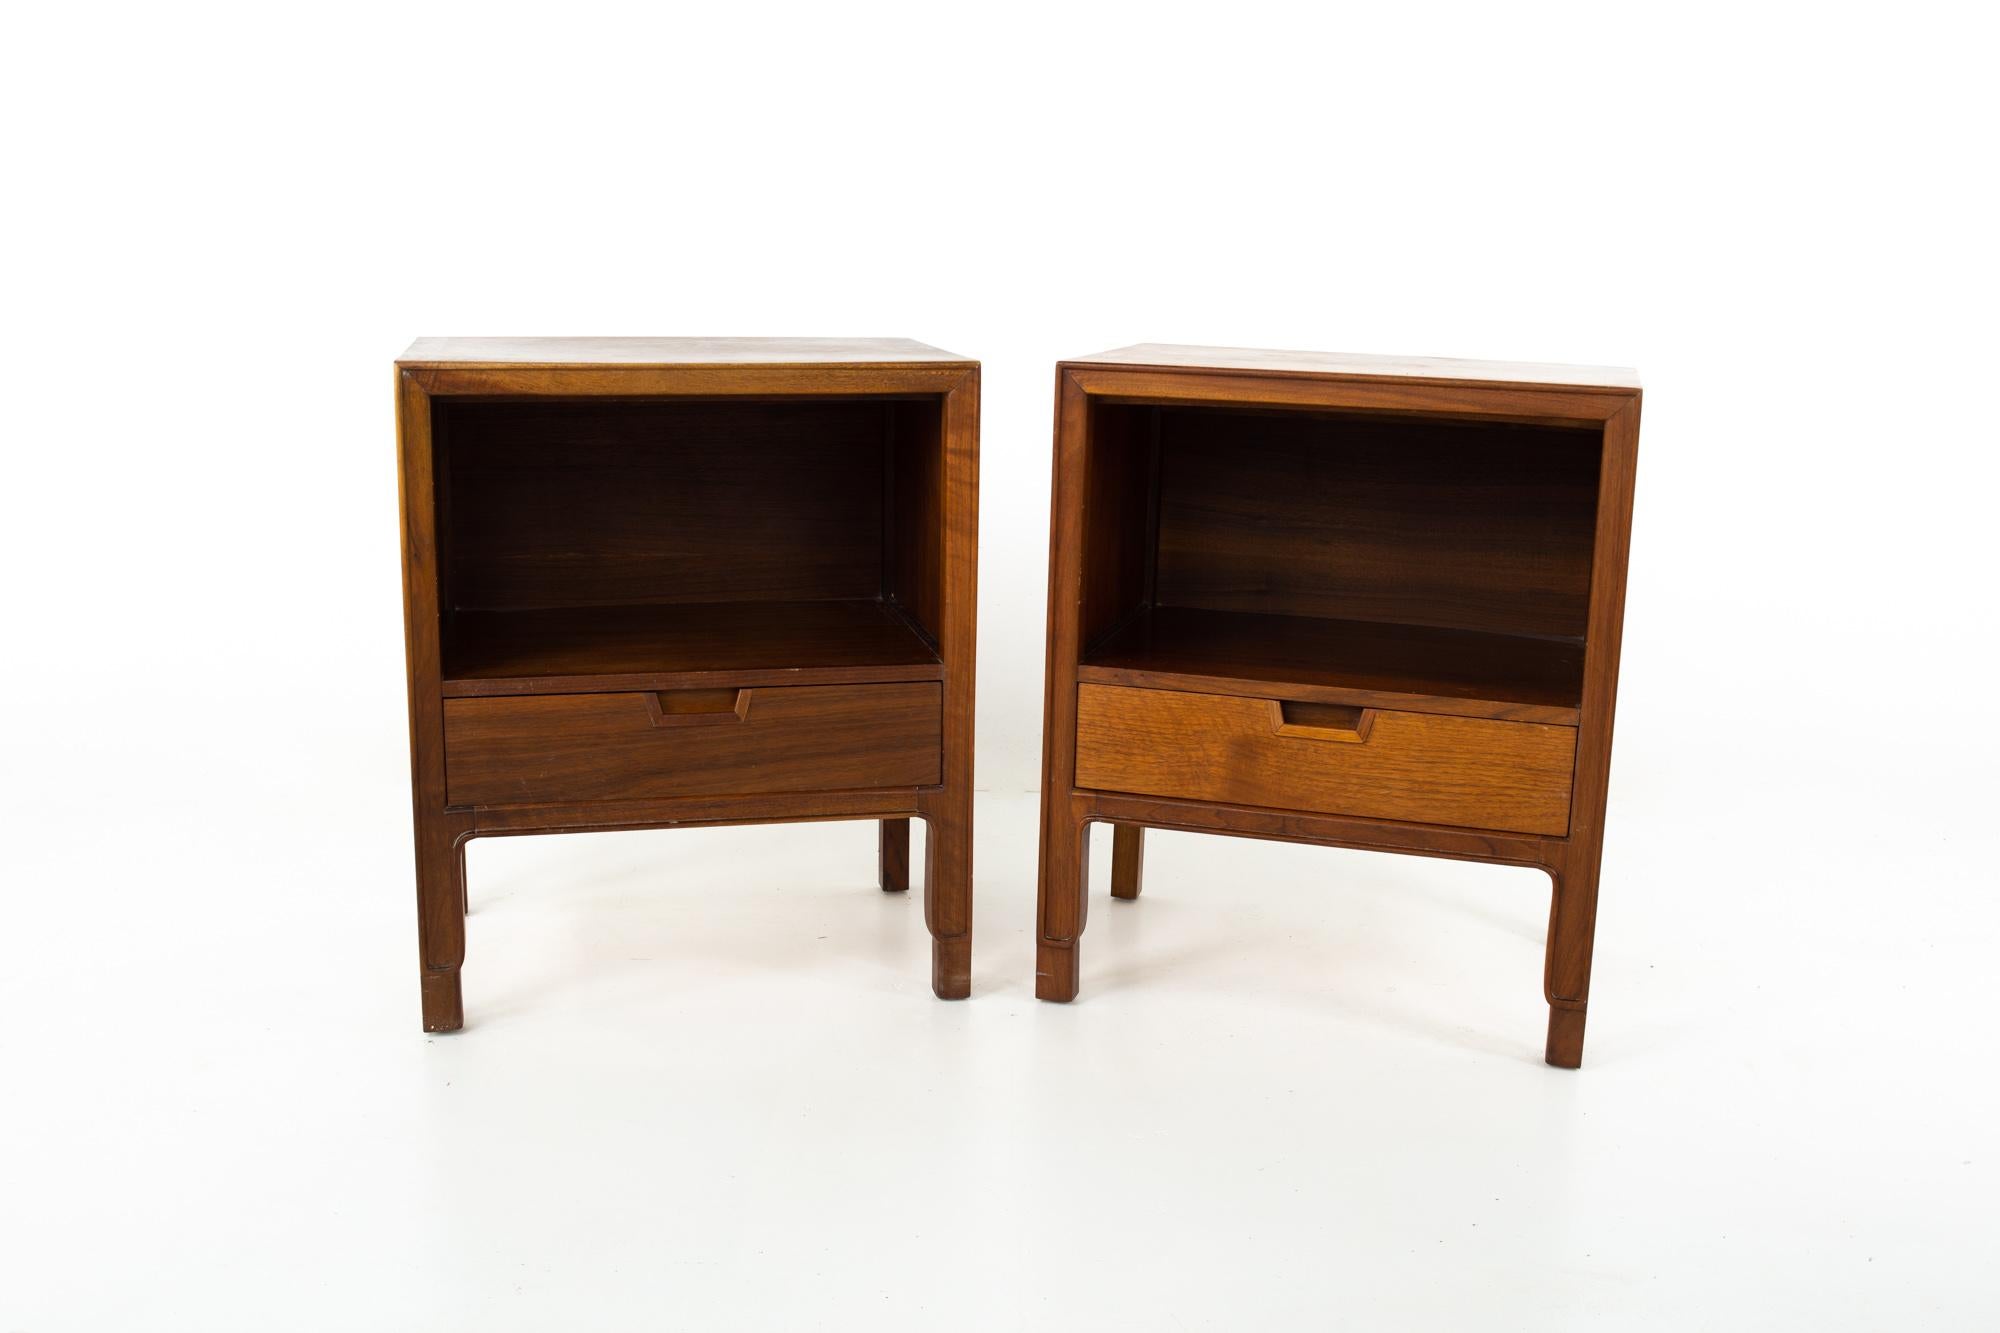 Mount Airy Janus Mid Century walnut nightstands, pair
Each nightstand measures: 21 wide x 15 deep x 25 inches high

This price includes getting this piece in what we call restored vintage condition. That means the piece is permanently fixed upon